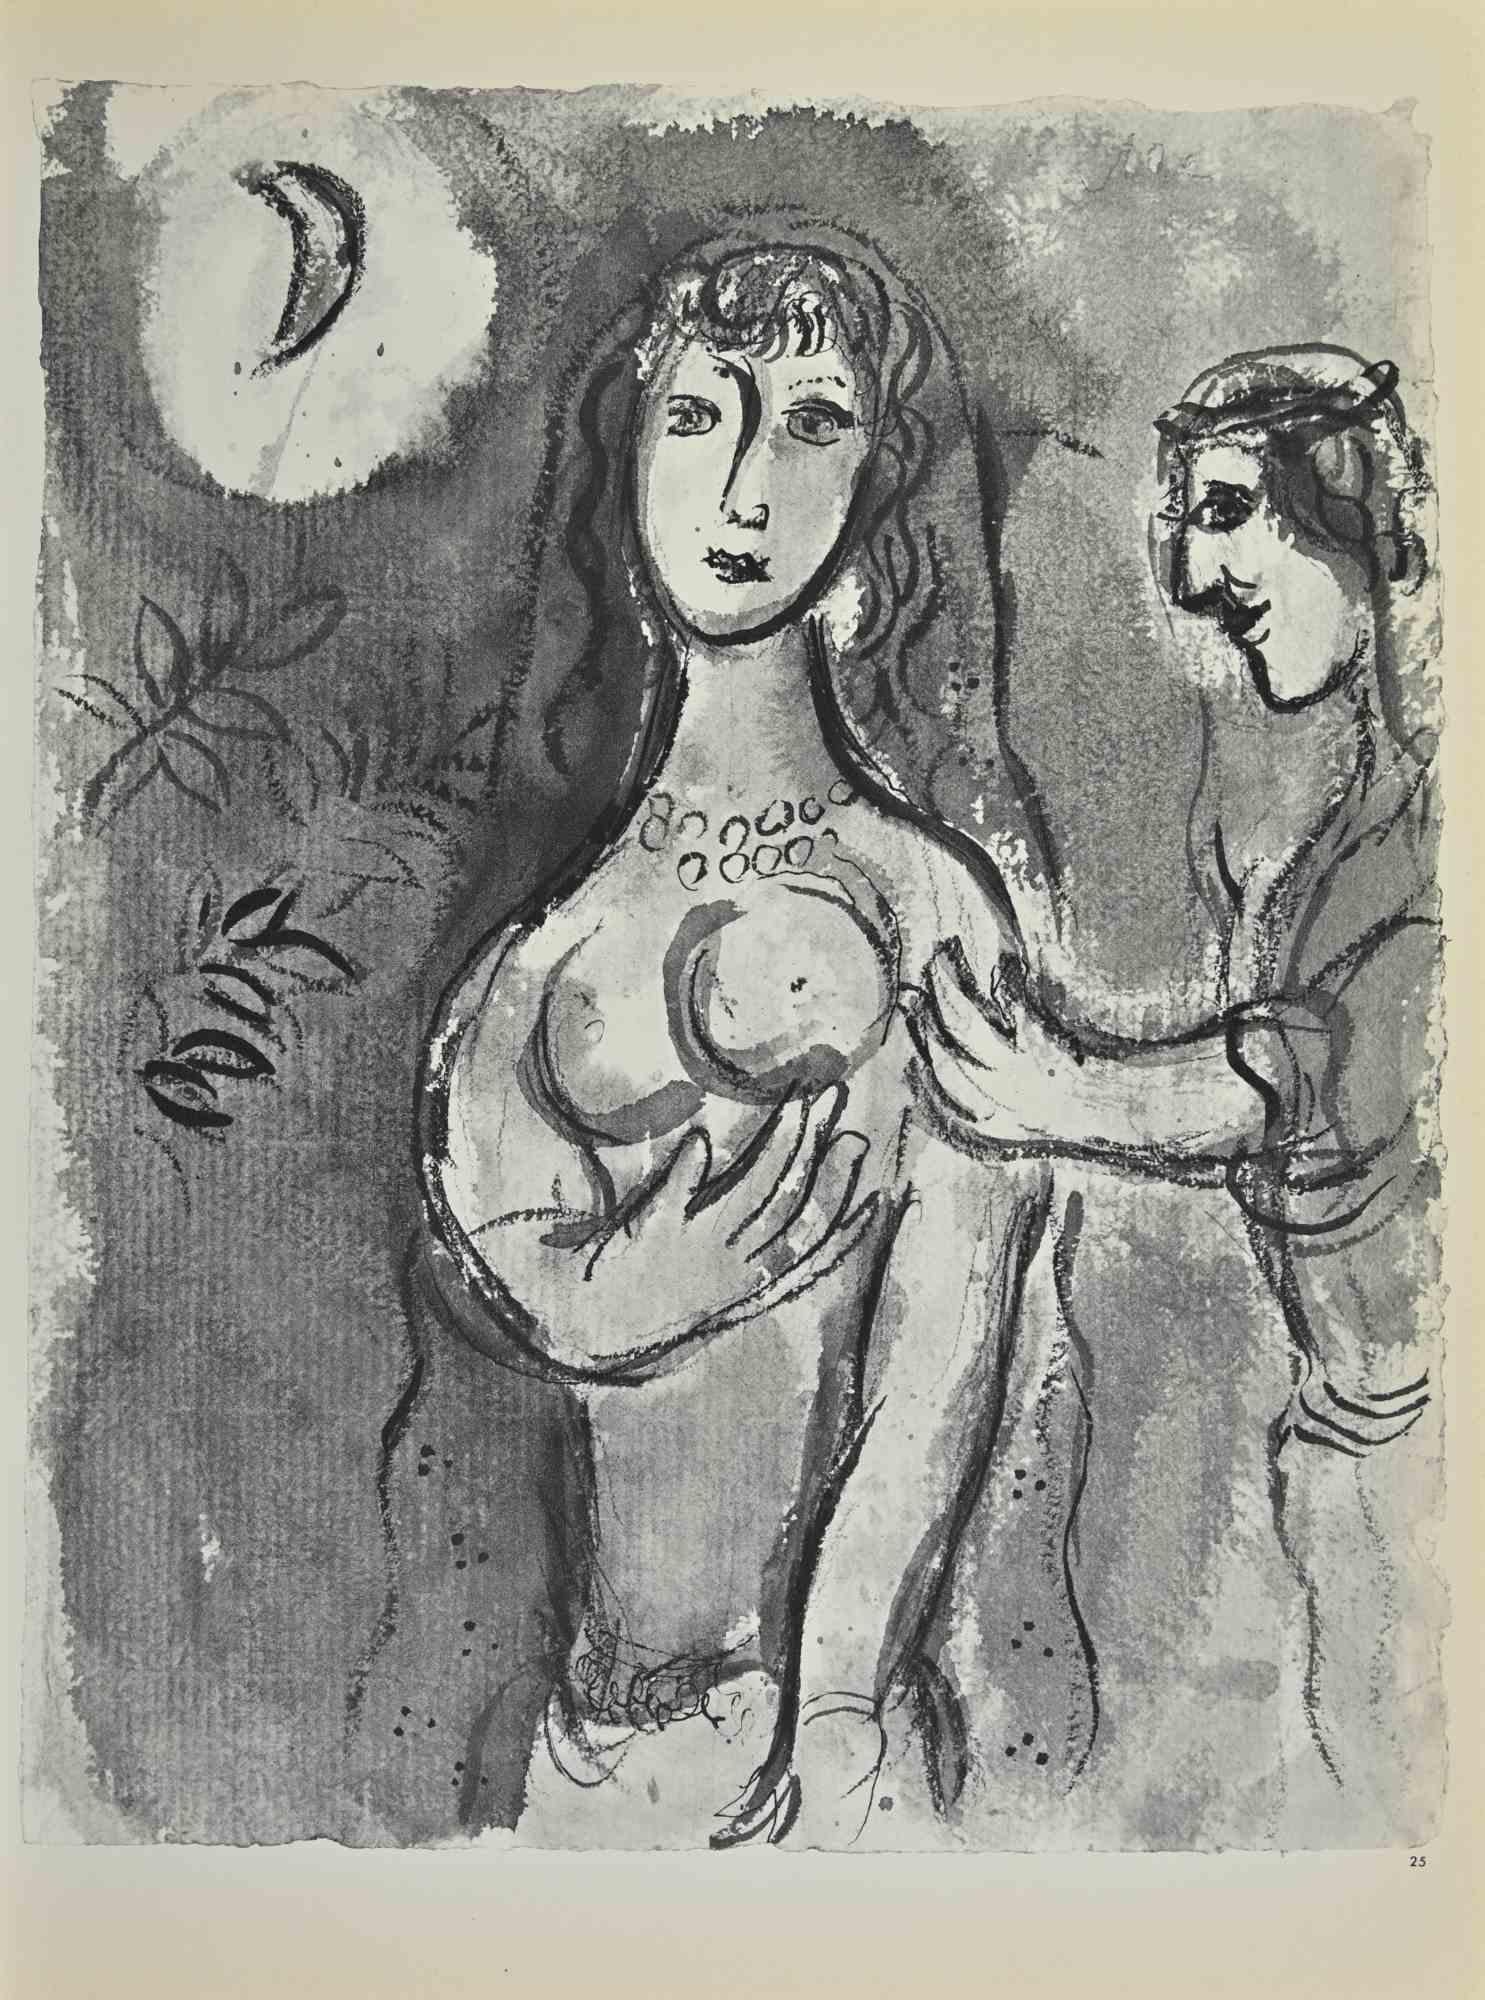 Rachel Goes Away with Jacob is an artwork realized by March Chagall, 1960s.

Lithograph on brown-toned paper, no signature.

Lithograph on both sheets.

Edition of 6500 unsigned lithographs. Printed by Mourlot and published by Tériade, Paris.

Ref.